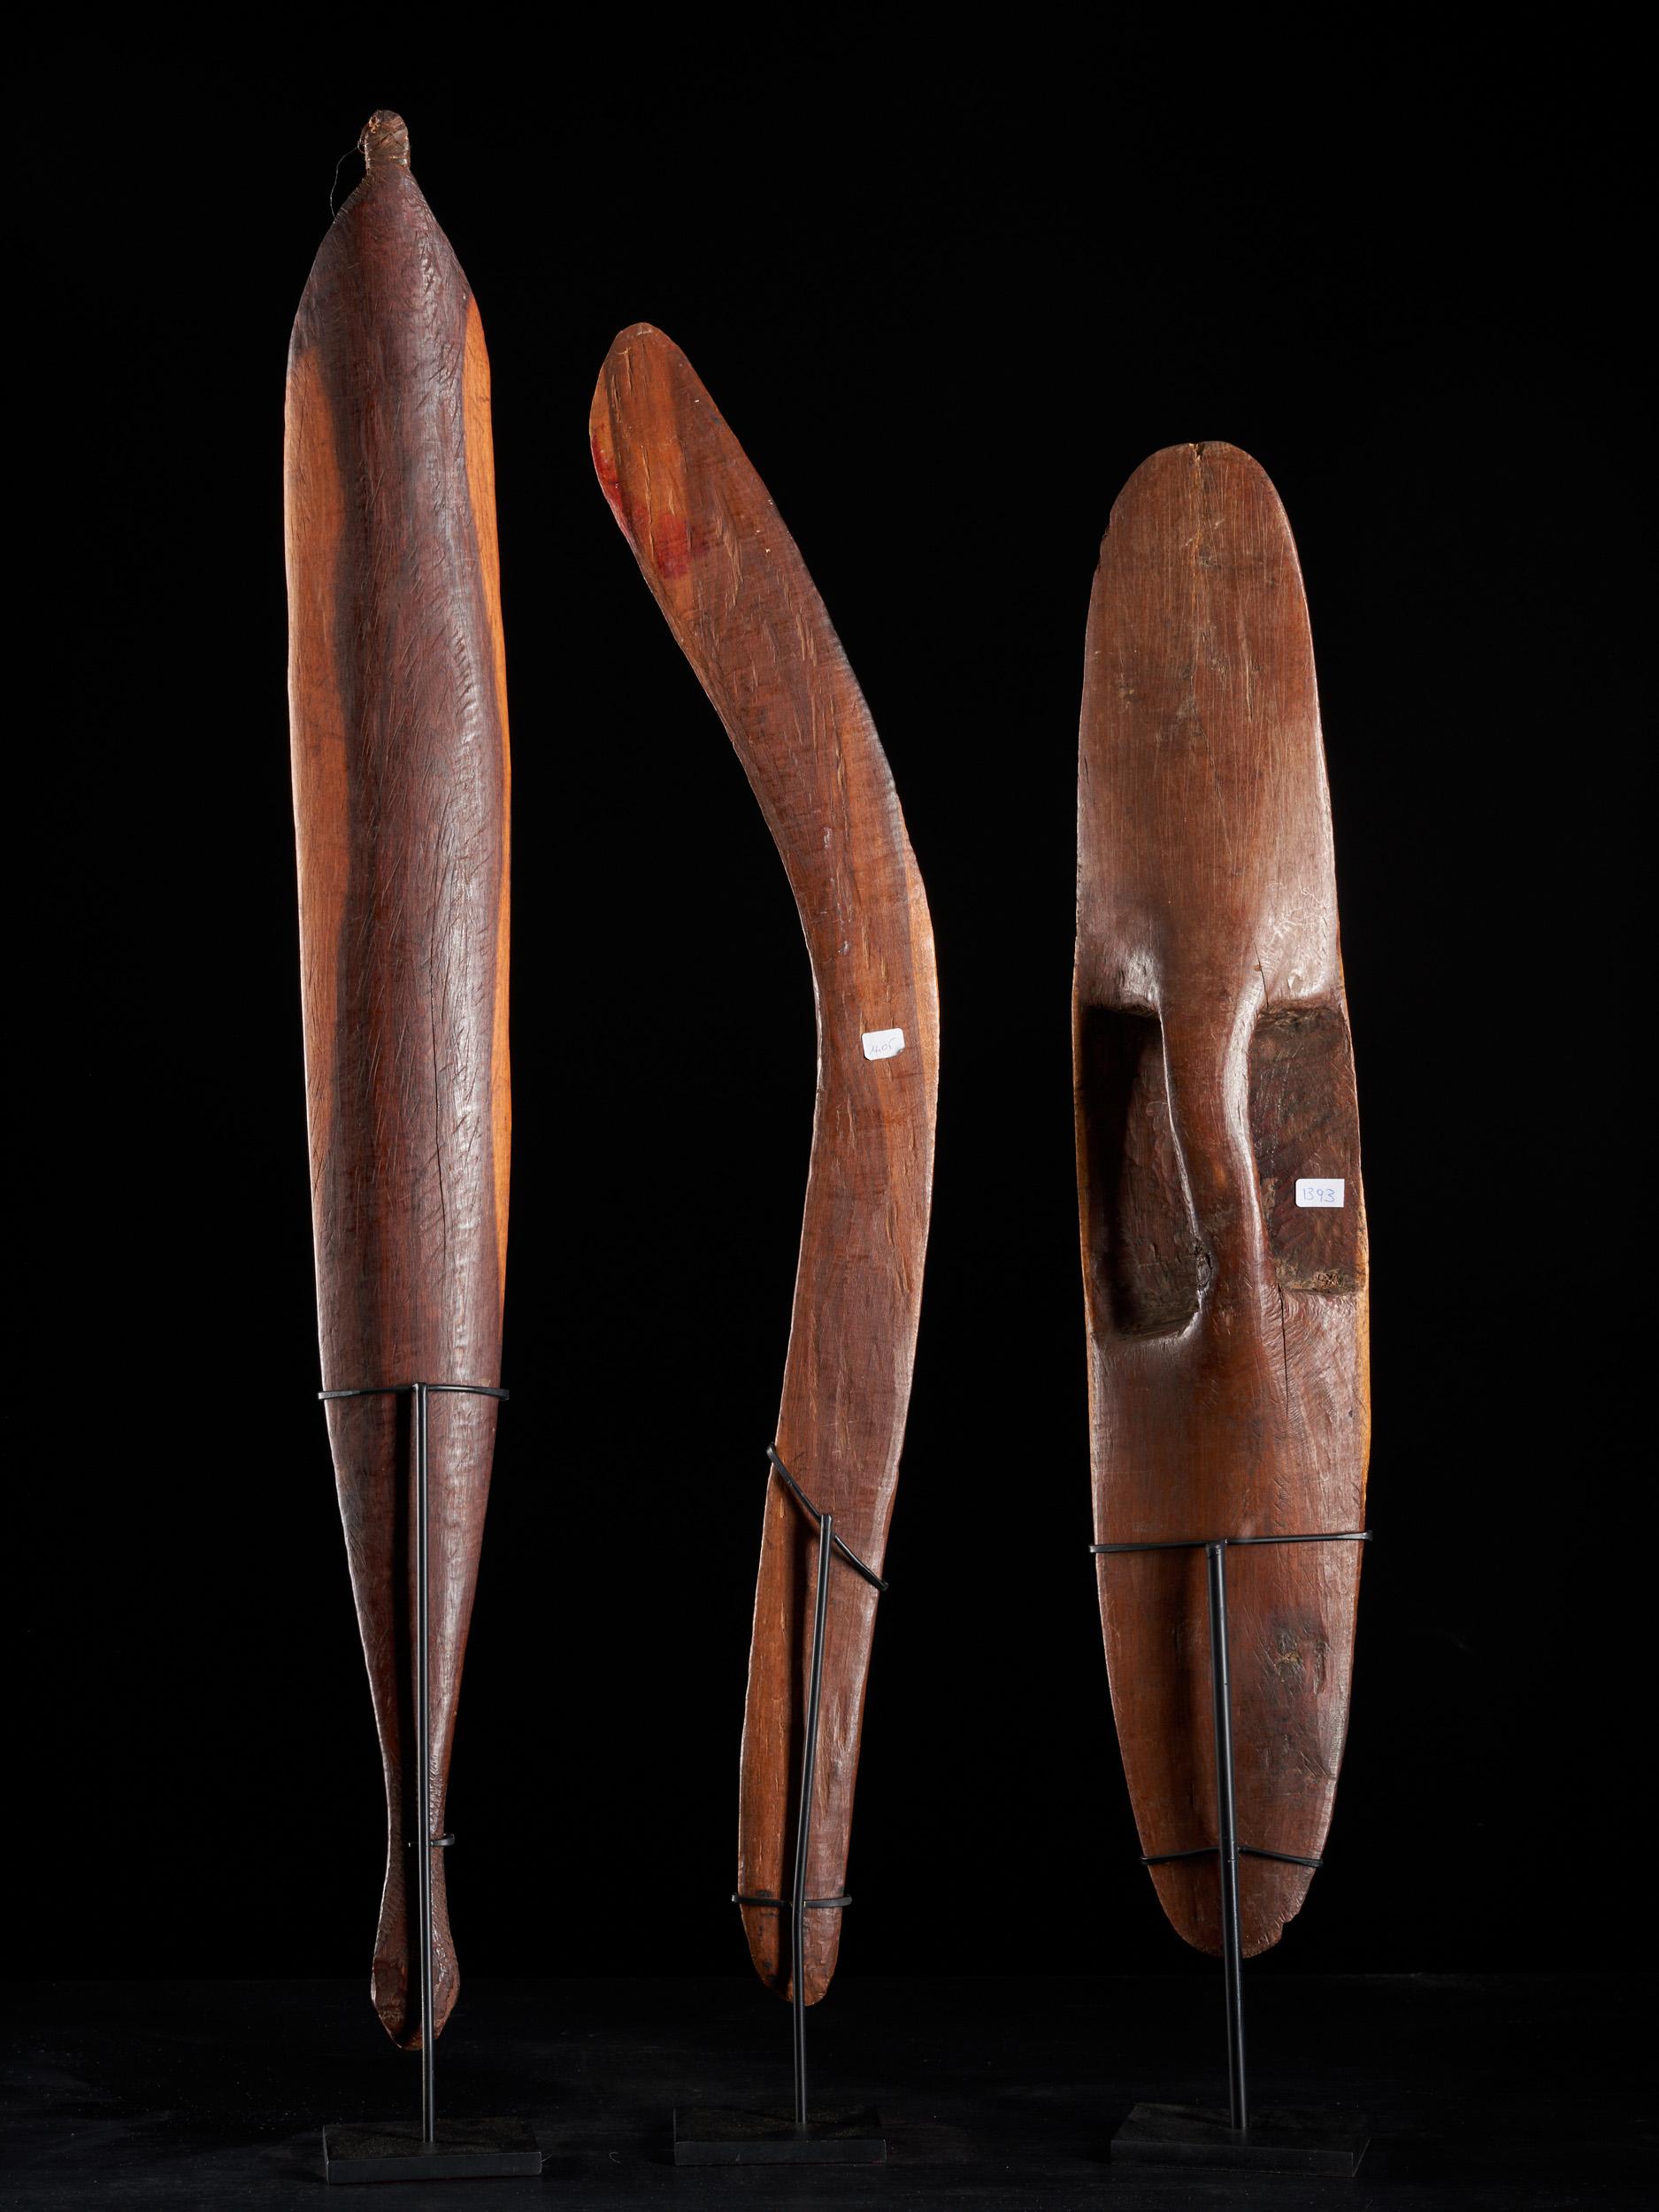 Set of Australian Aboriginal items with spear thrower, shield and boomerang.